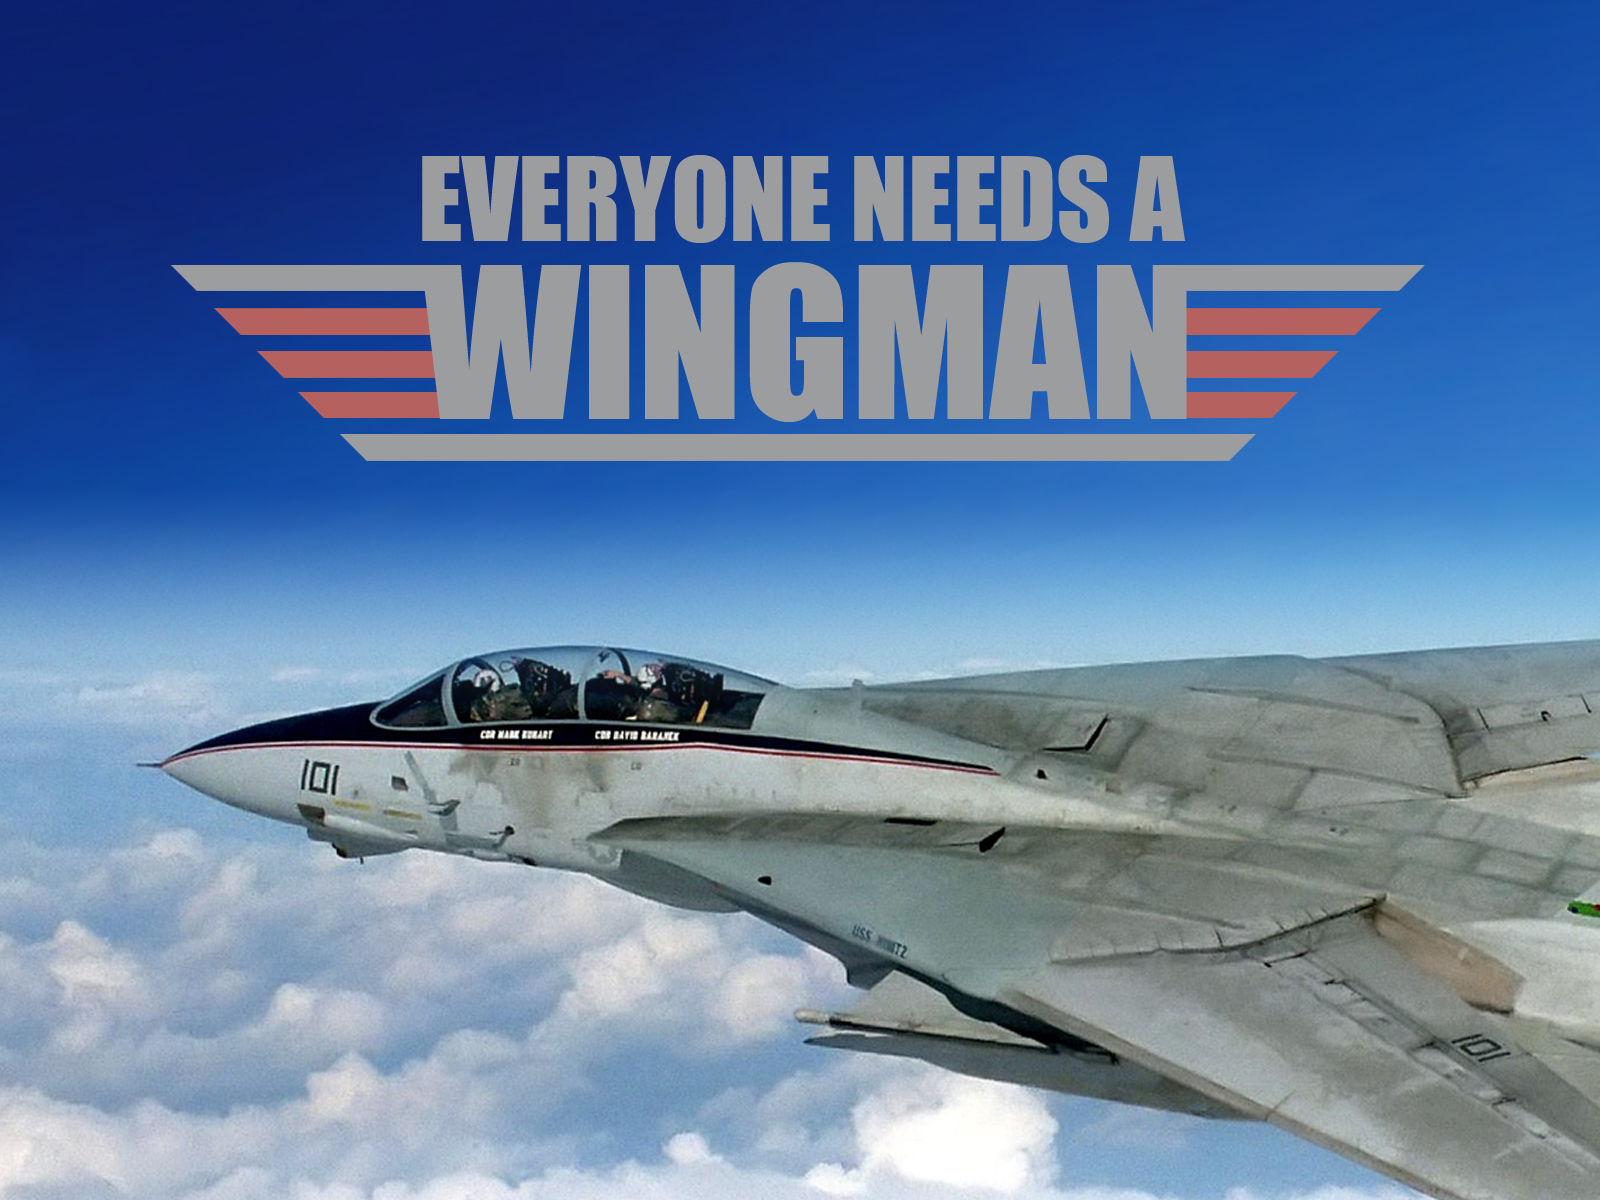 Amazing Wingman Pictures & Backgrounds